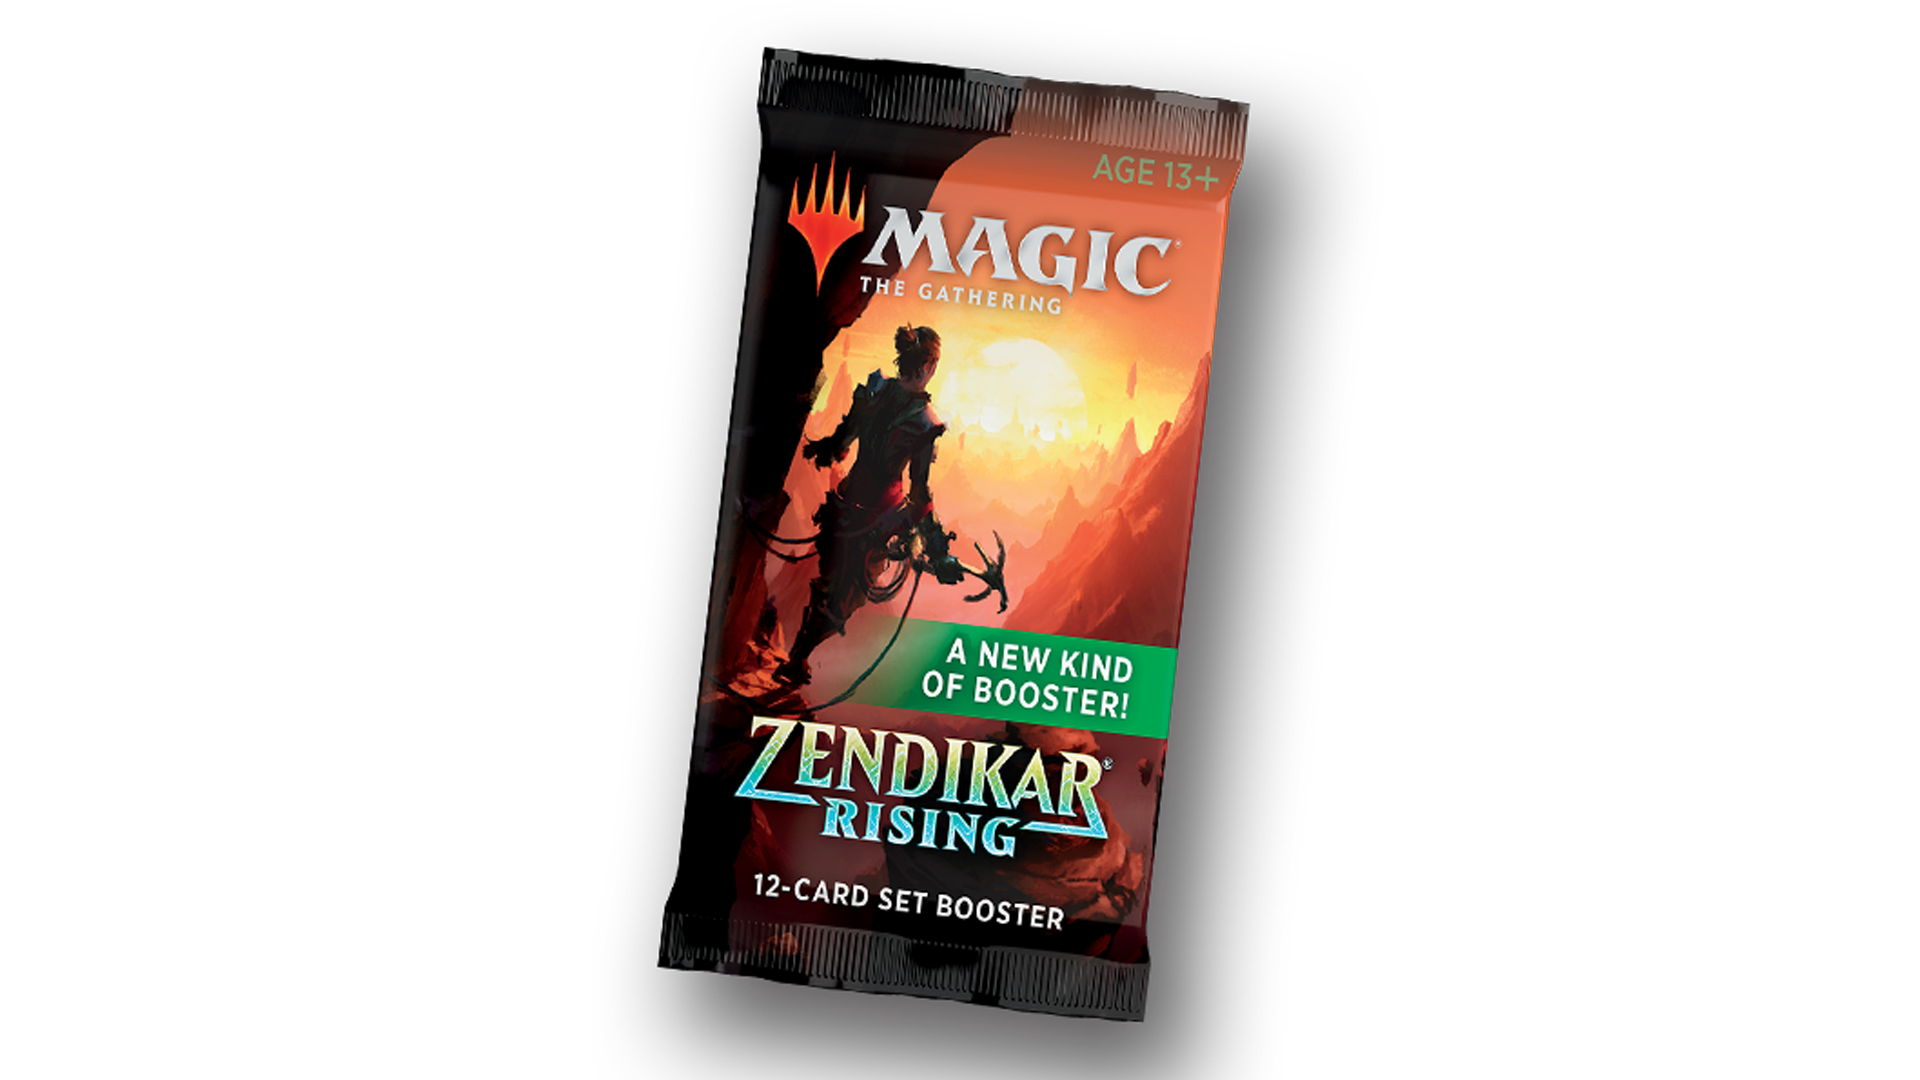 Image for Magic: The Gathering’s new set boosters want to make opening card packs even more fun